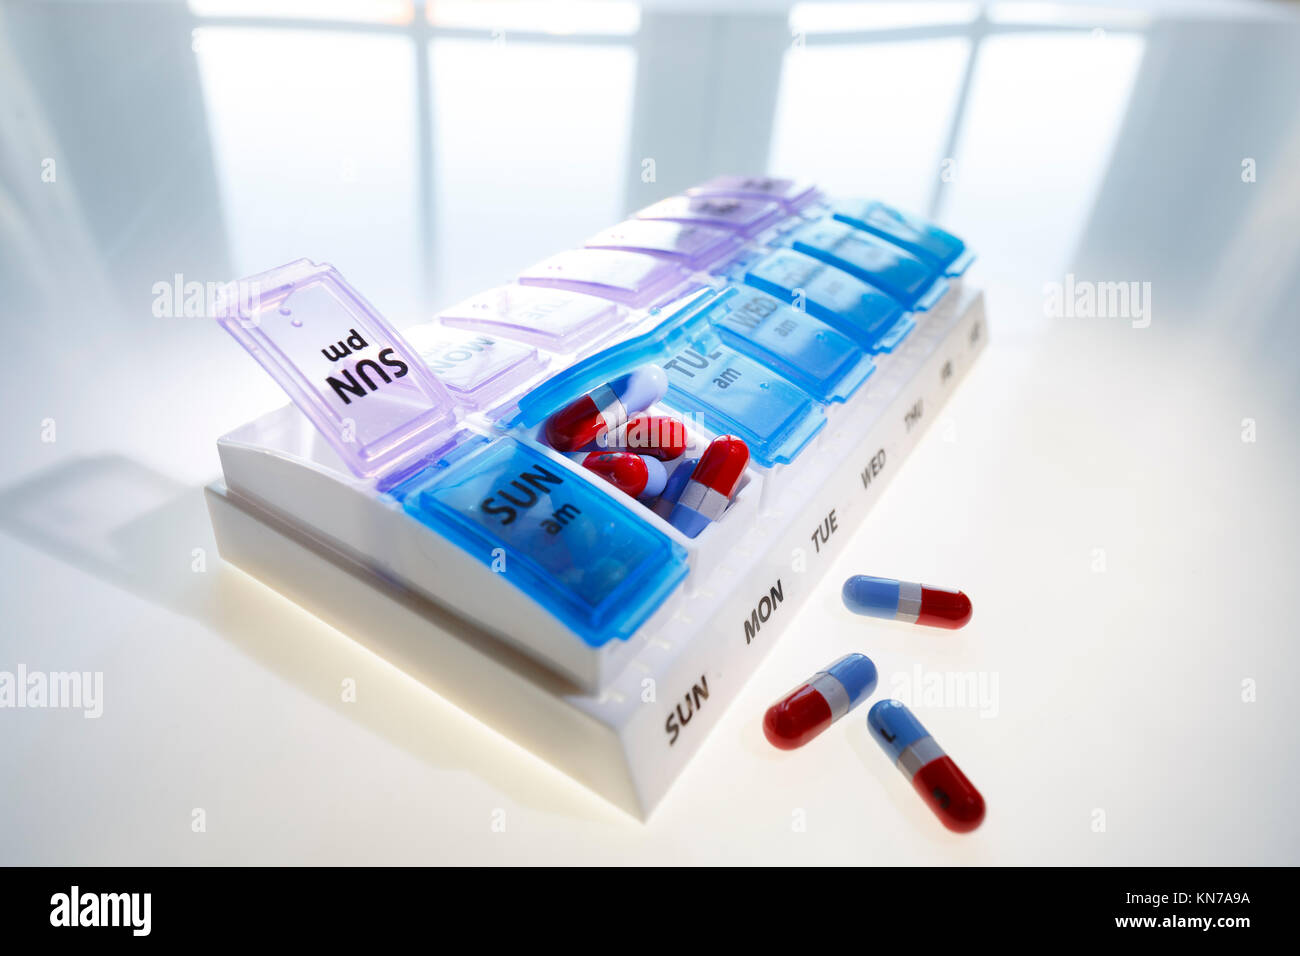 A weekly pill dispenser with one compartment open and full of tablets suggesting over medication Stock Photo